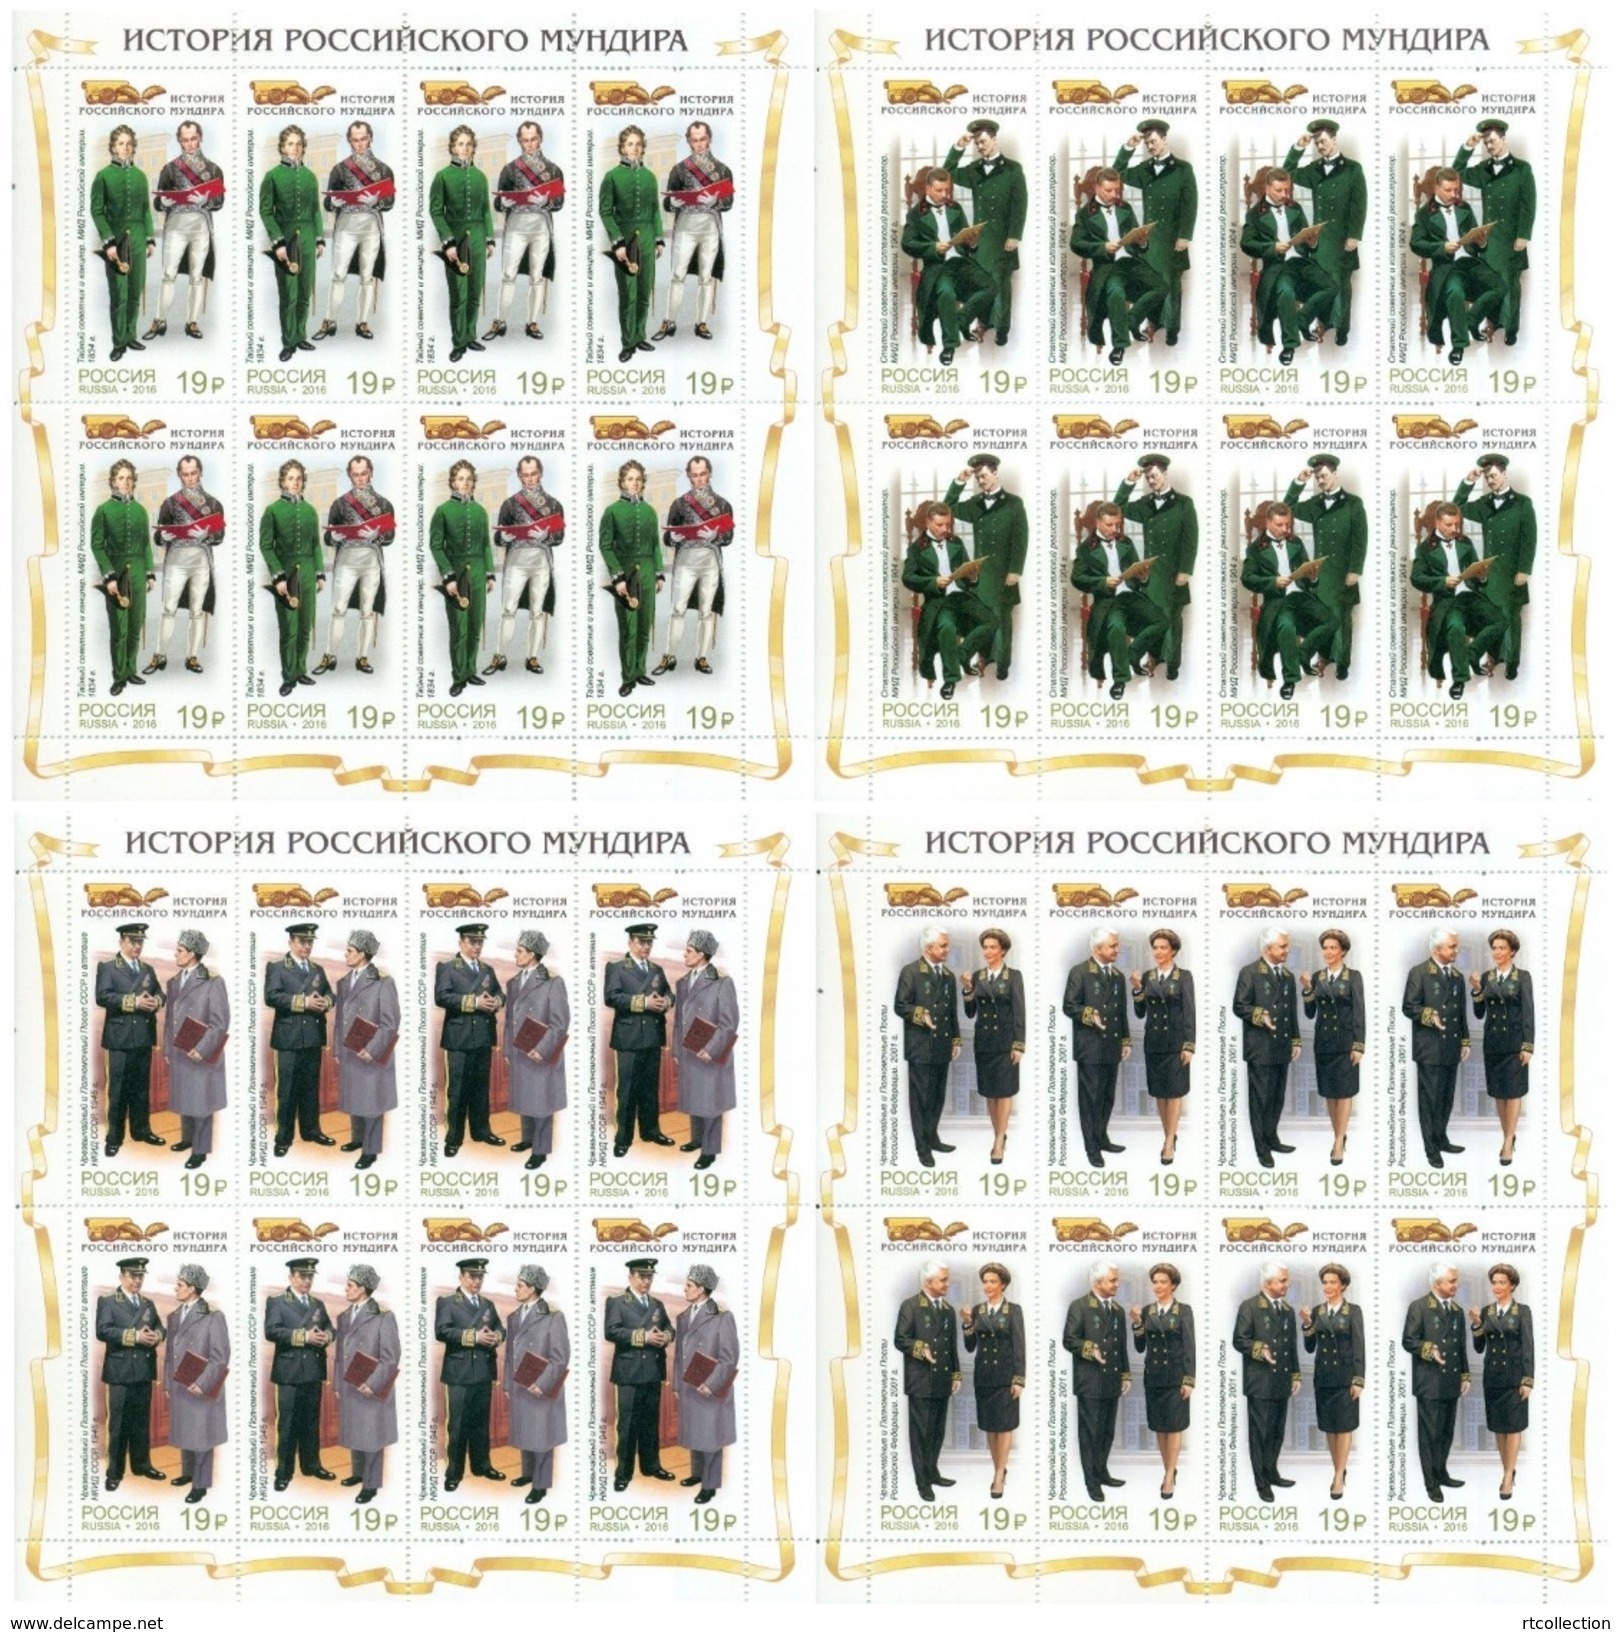 Russia 2016 4 Full Sheet History Russian Uniform Jacket Diplomatic Service Cloth Cultures Stamps MNH - Collezioni